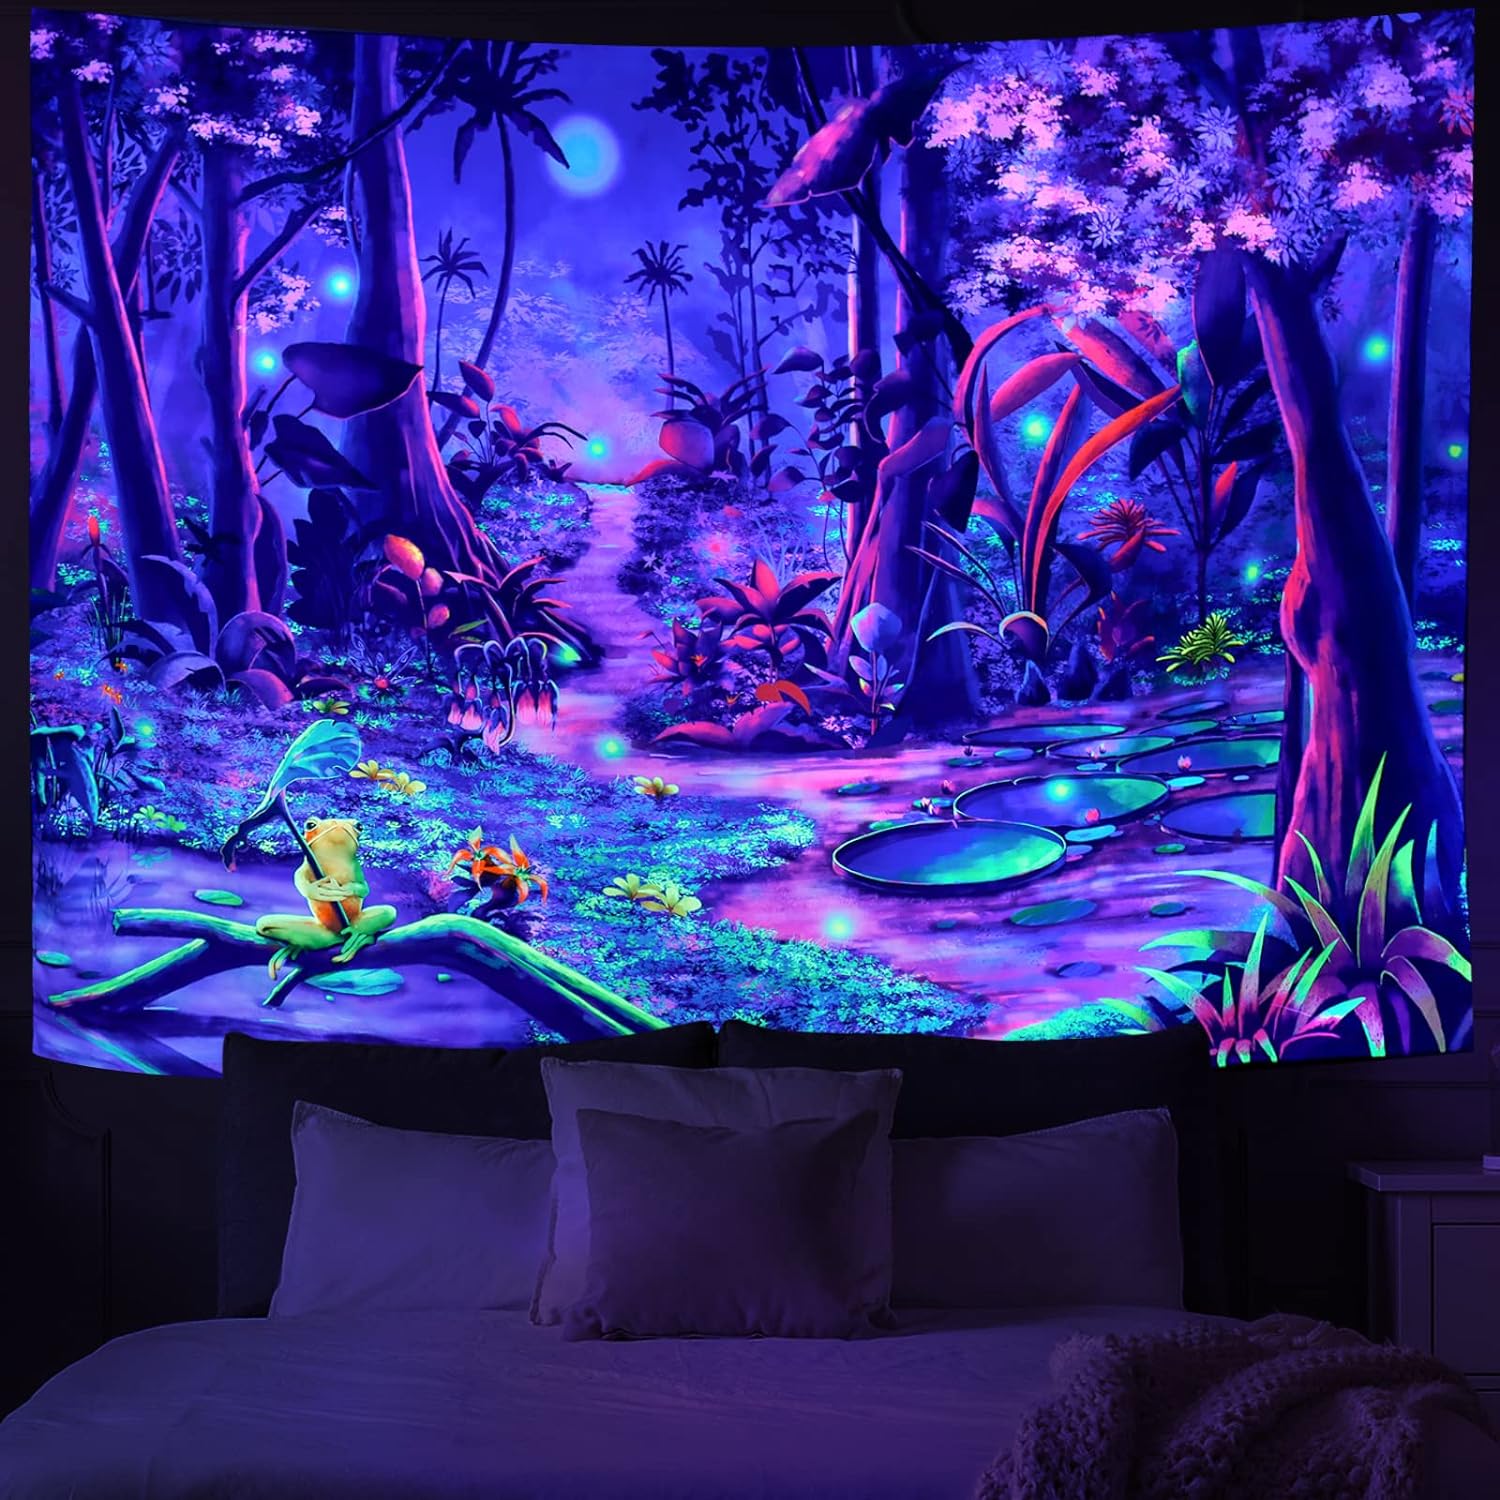 Obsecolors Blacklight Fantasy Forest Tapestry Psychedelic Plant Tapestry UV Reactive Nature Tree Tapestry Mysterious Landscape Tapestry Wall Hanging for Bedroom Living Room